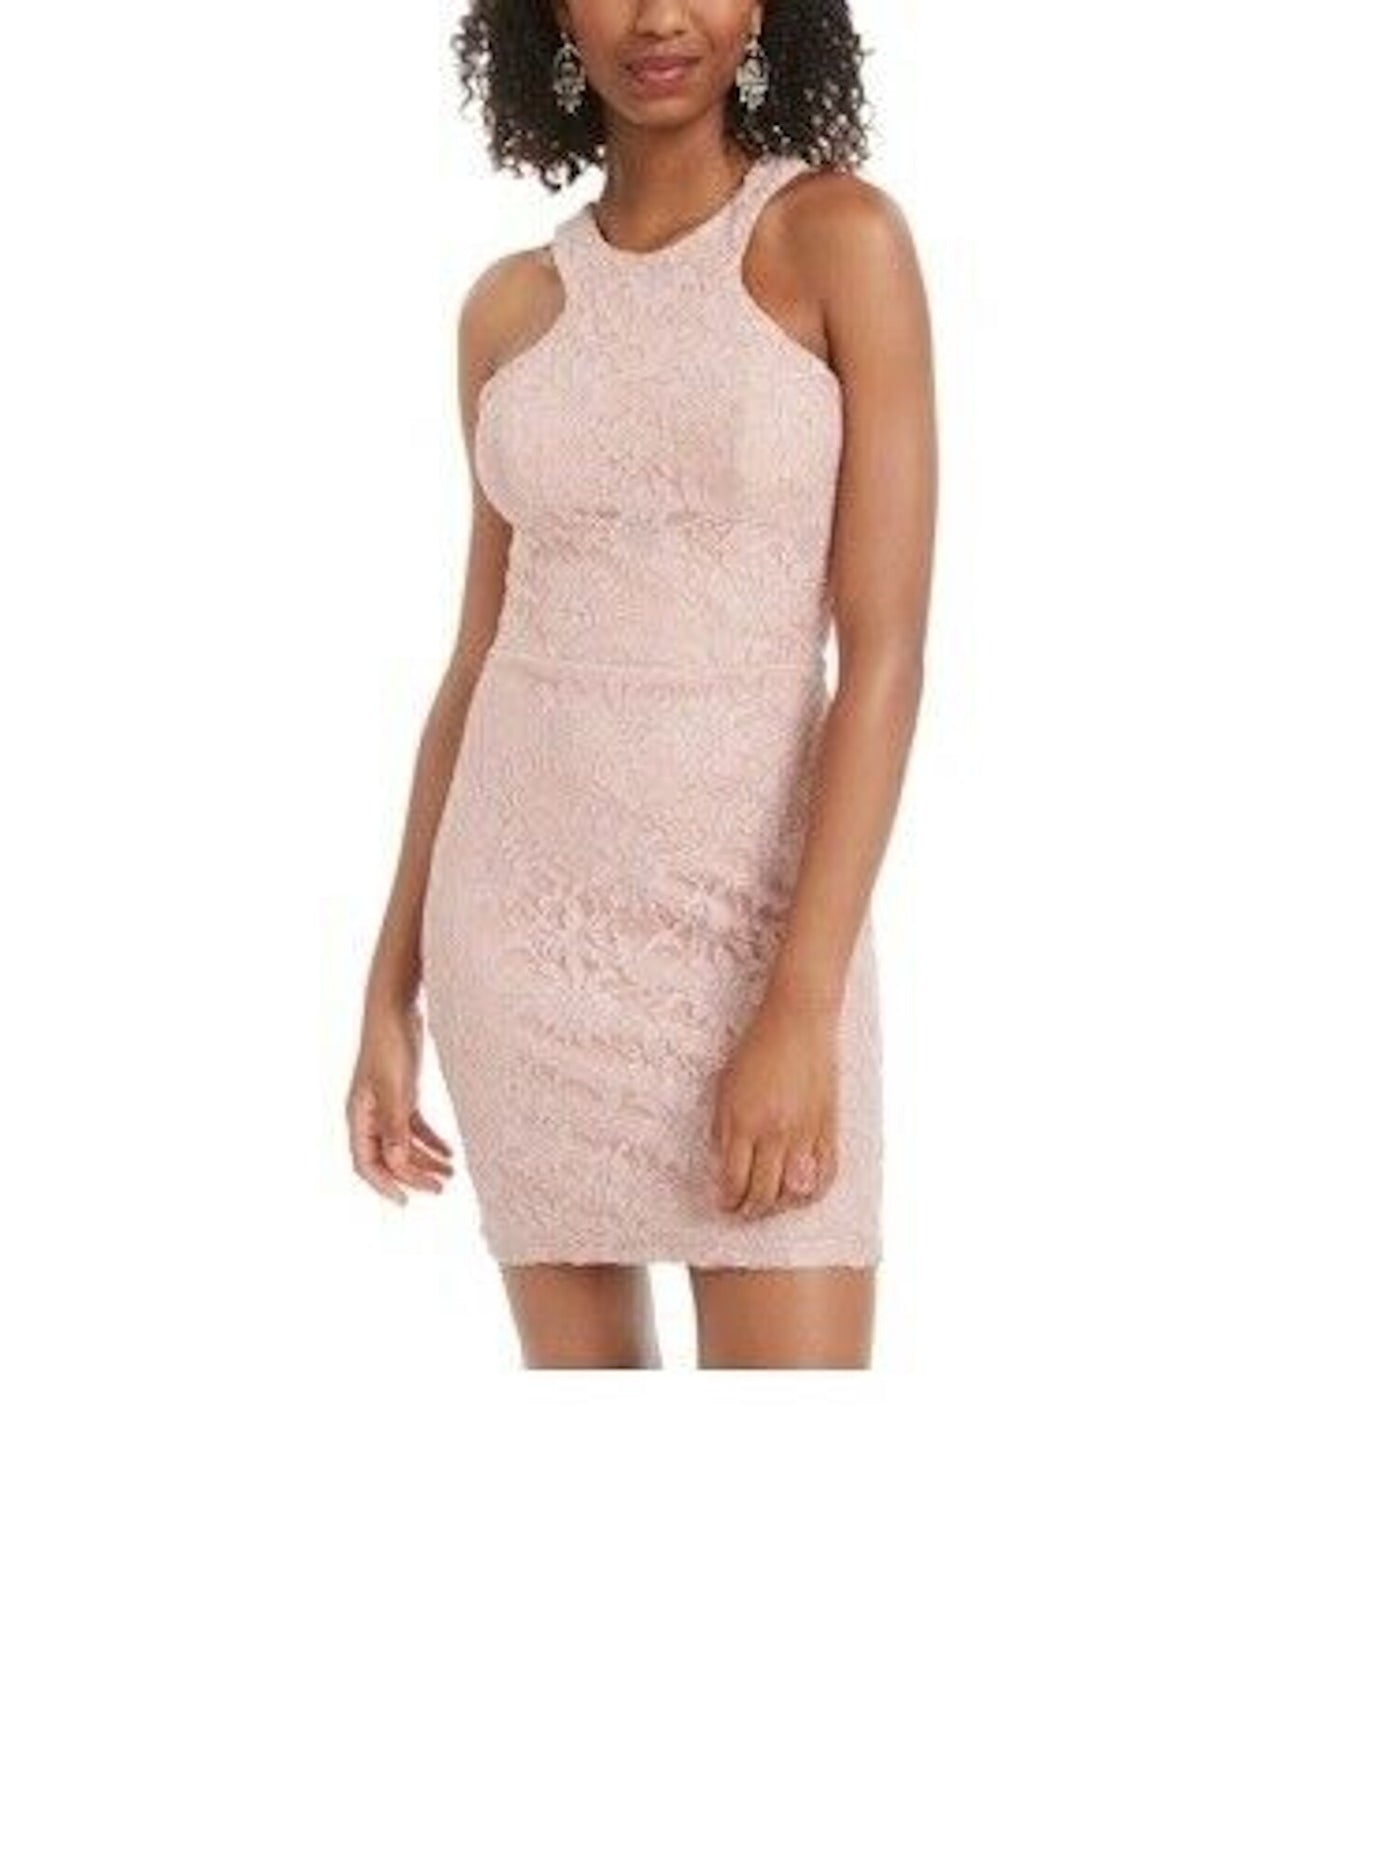 CITY STUDIO Womens Pink Embroidered Cut Out Cut Out Sleeveless Halter Short Cocktail Body Con Dress Juniors 11